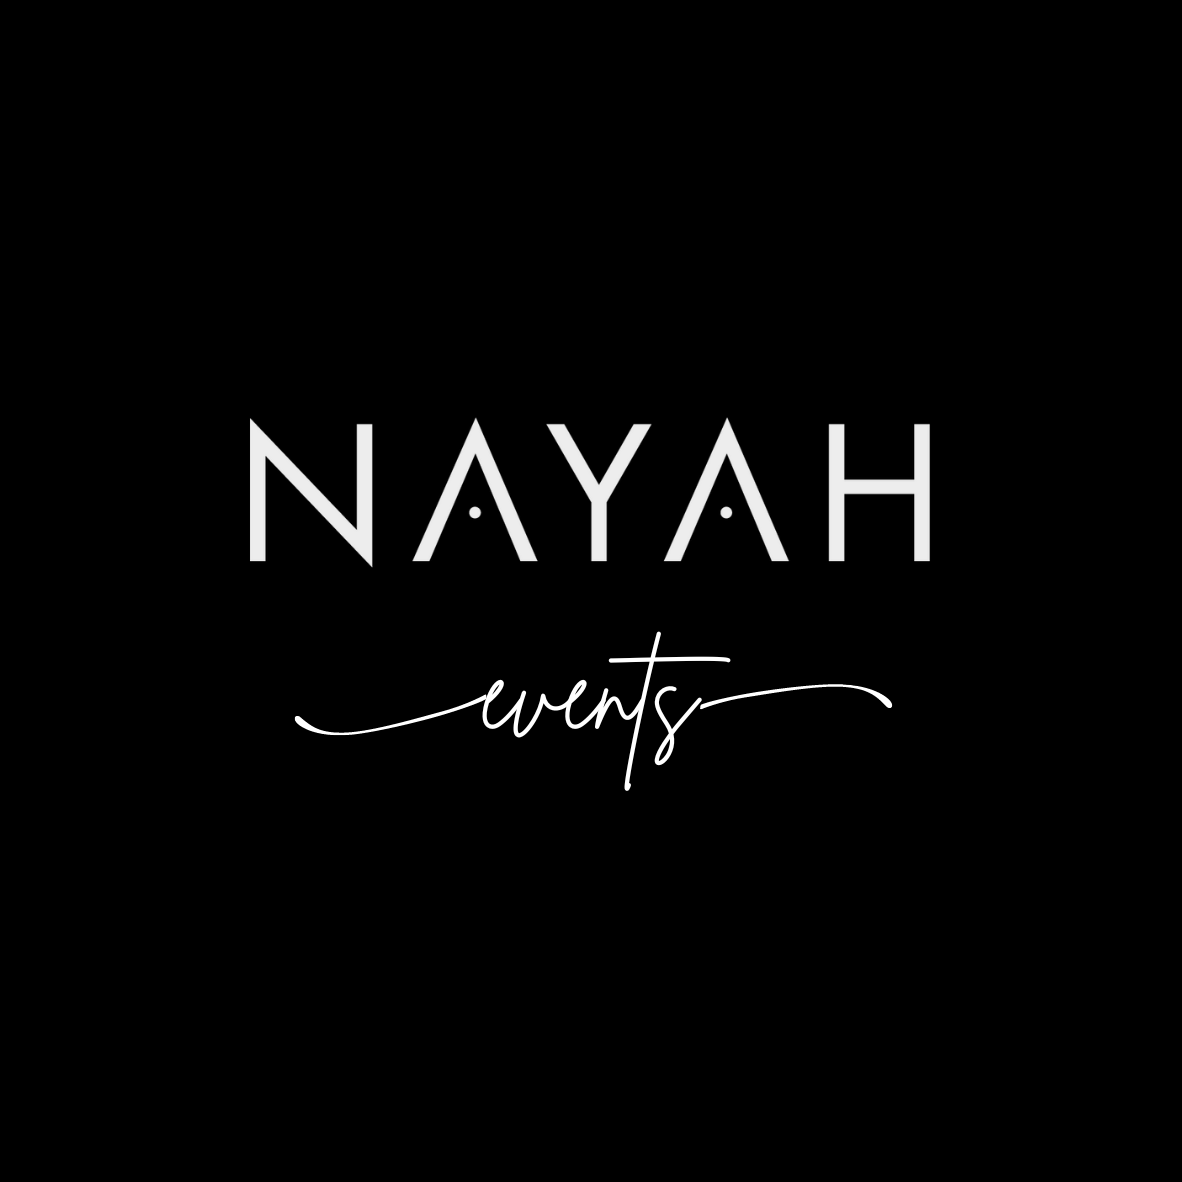 Nayah Events